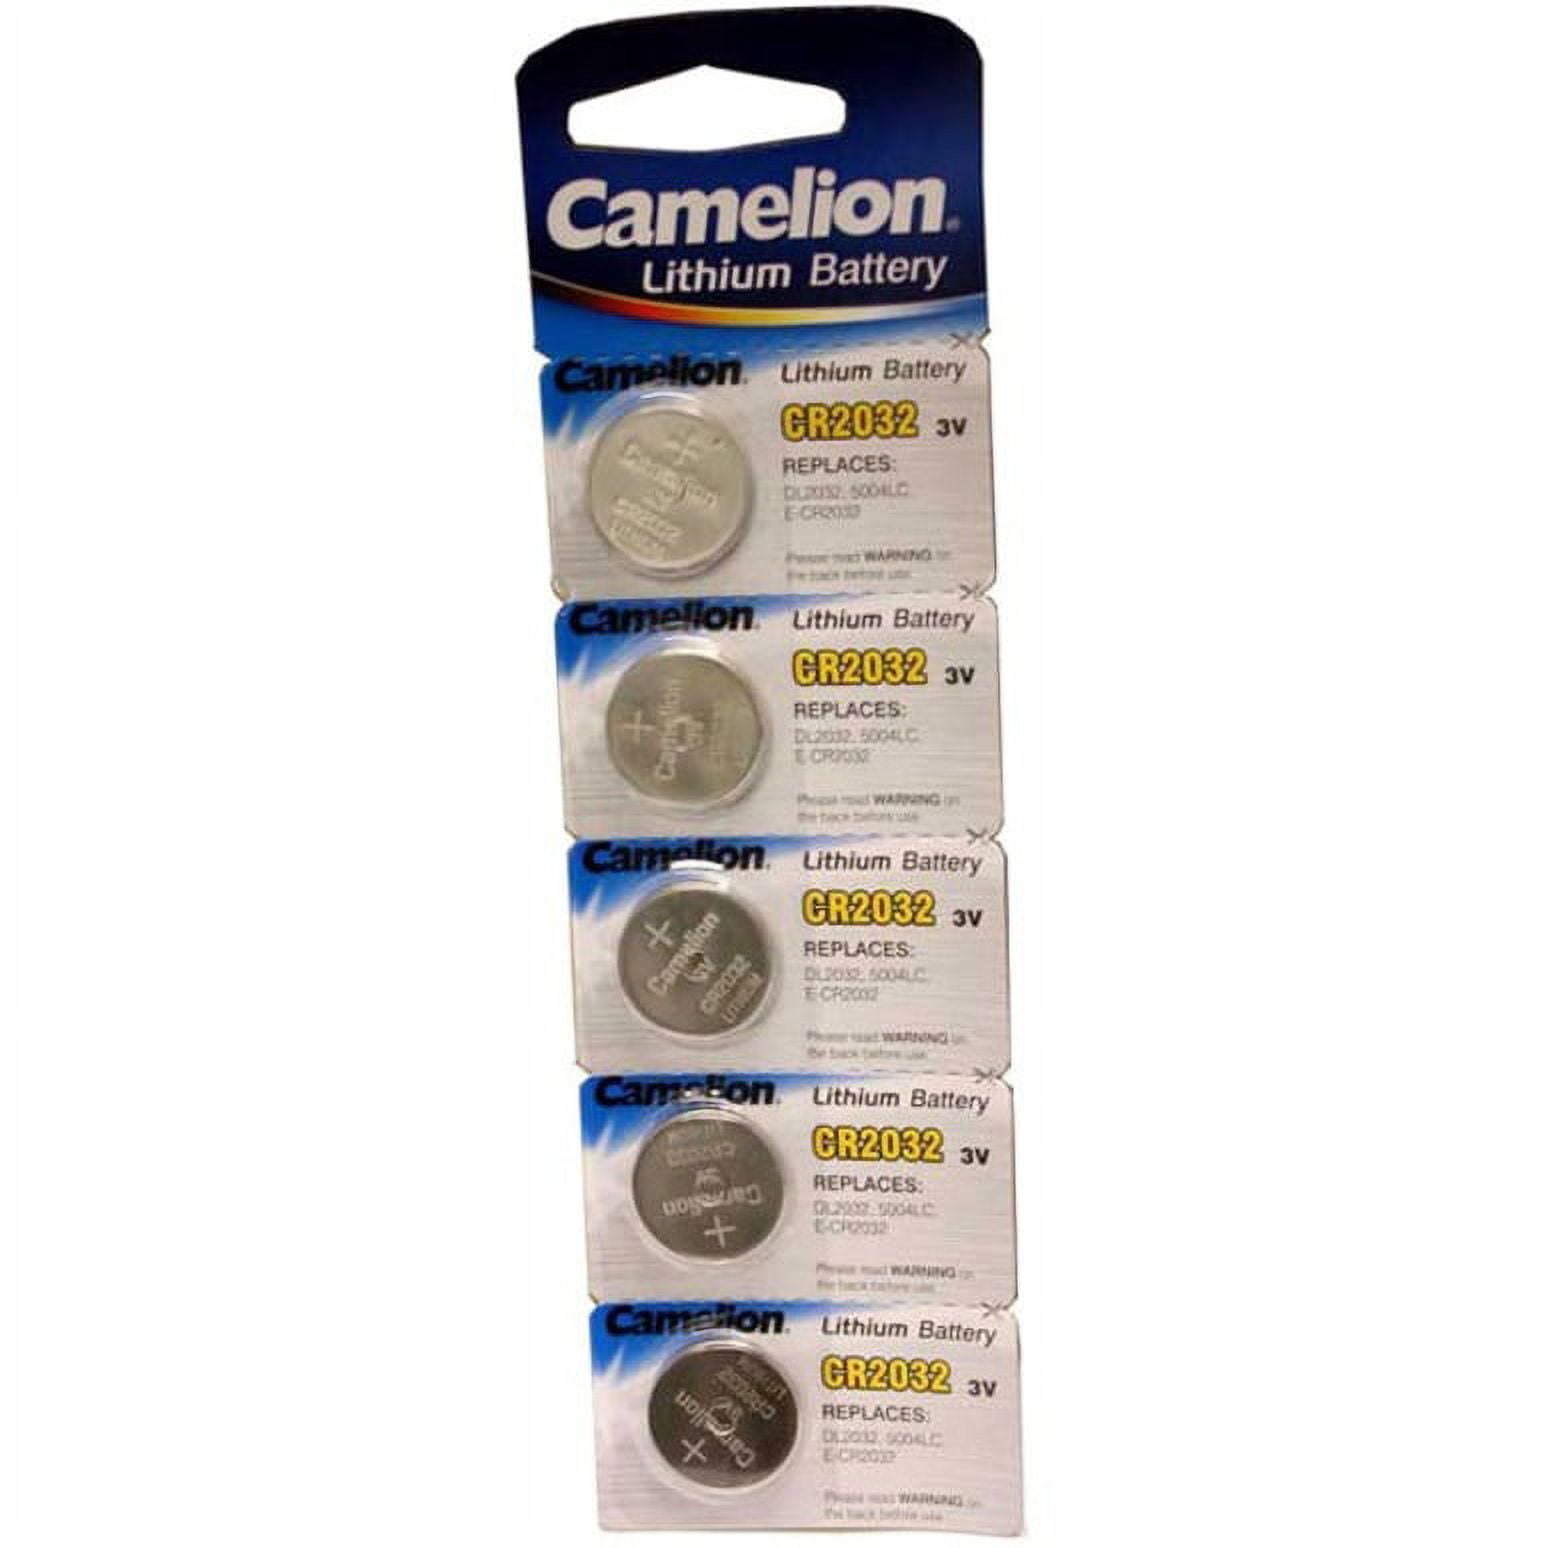 Camelion CR2032 3V Lithium Coin Cell Battery (Three Packaging